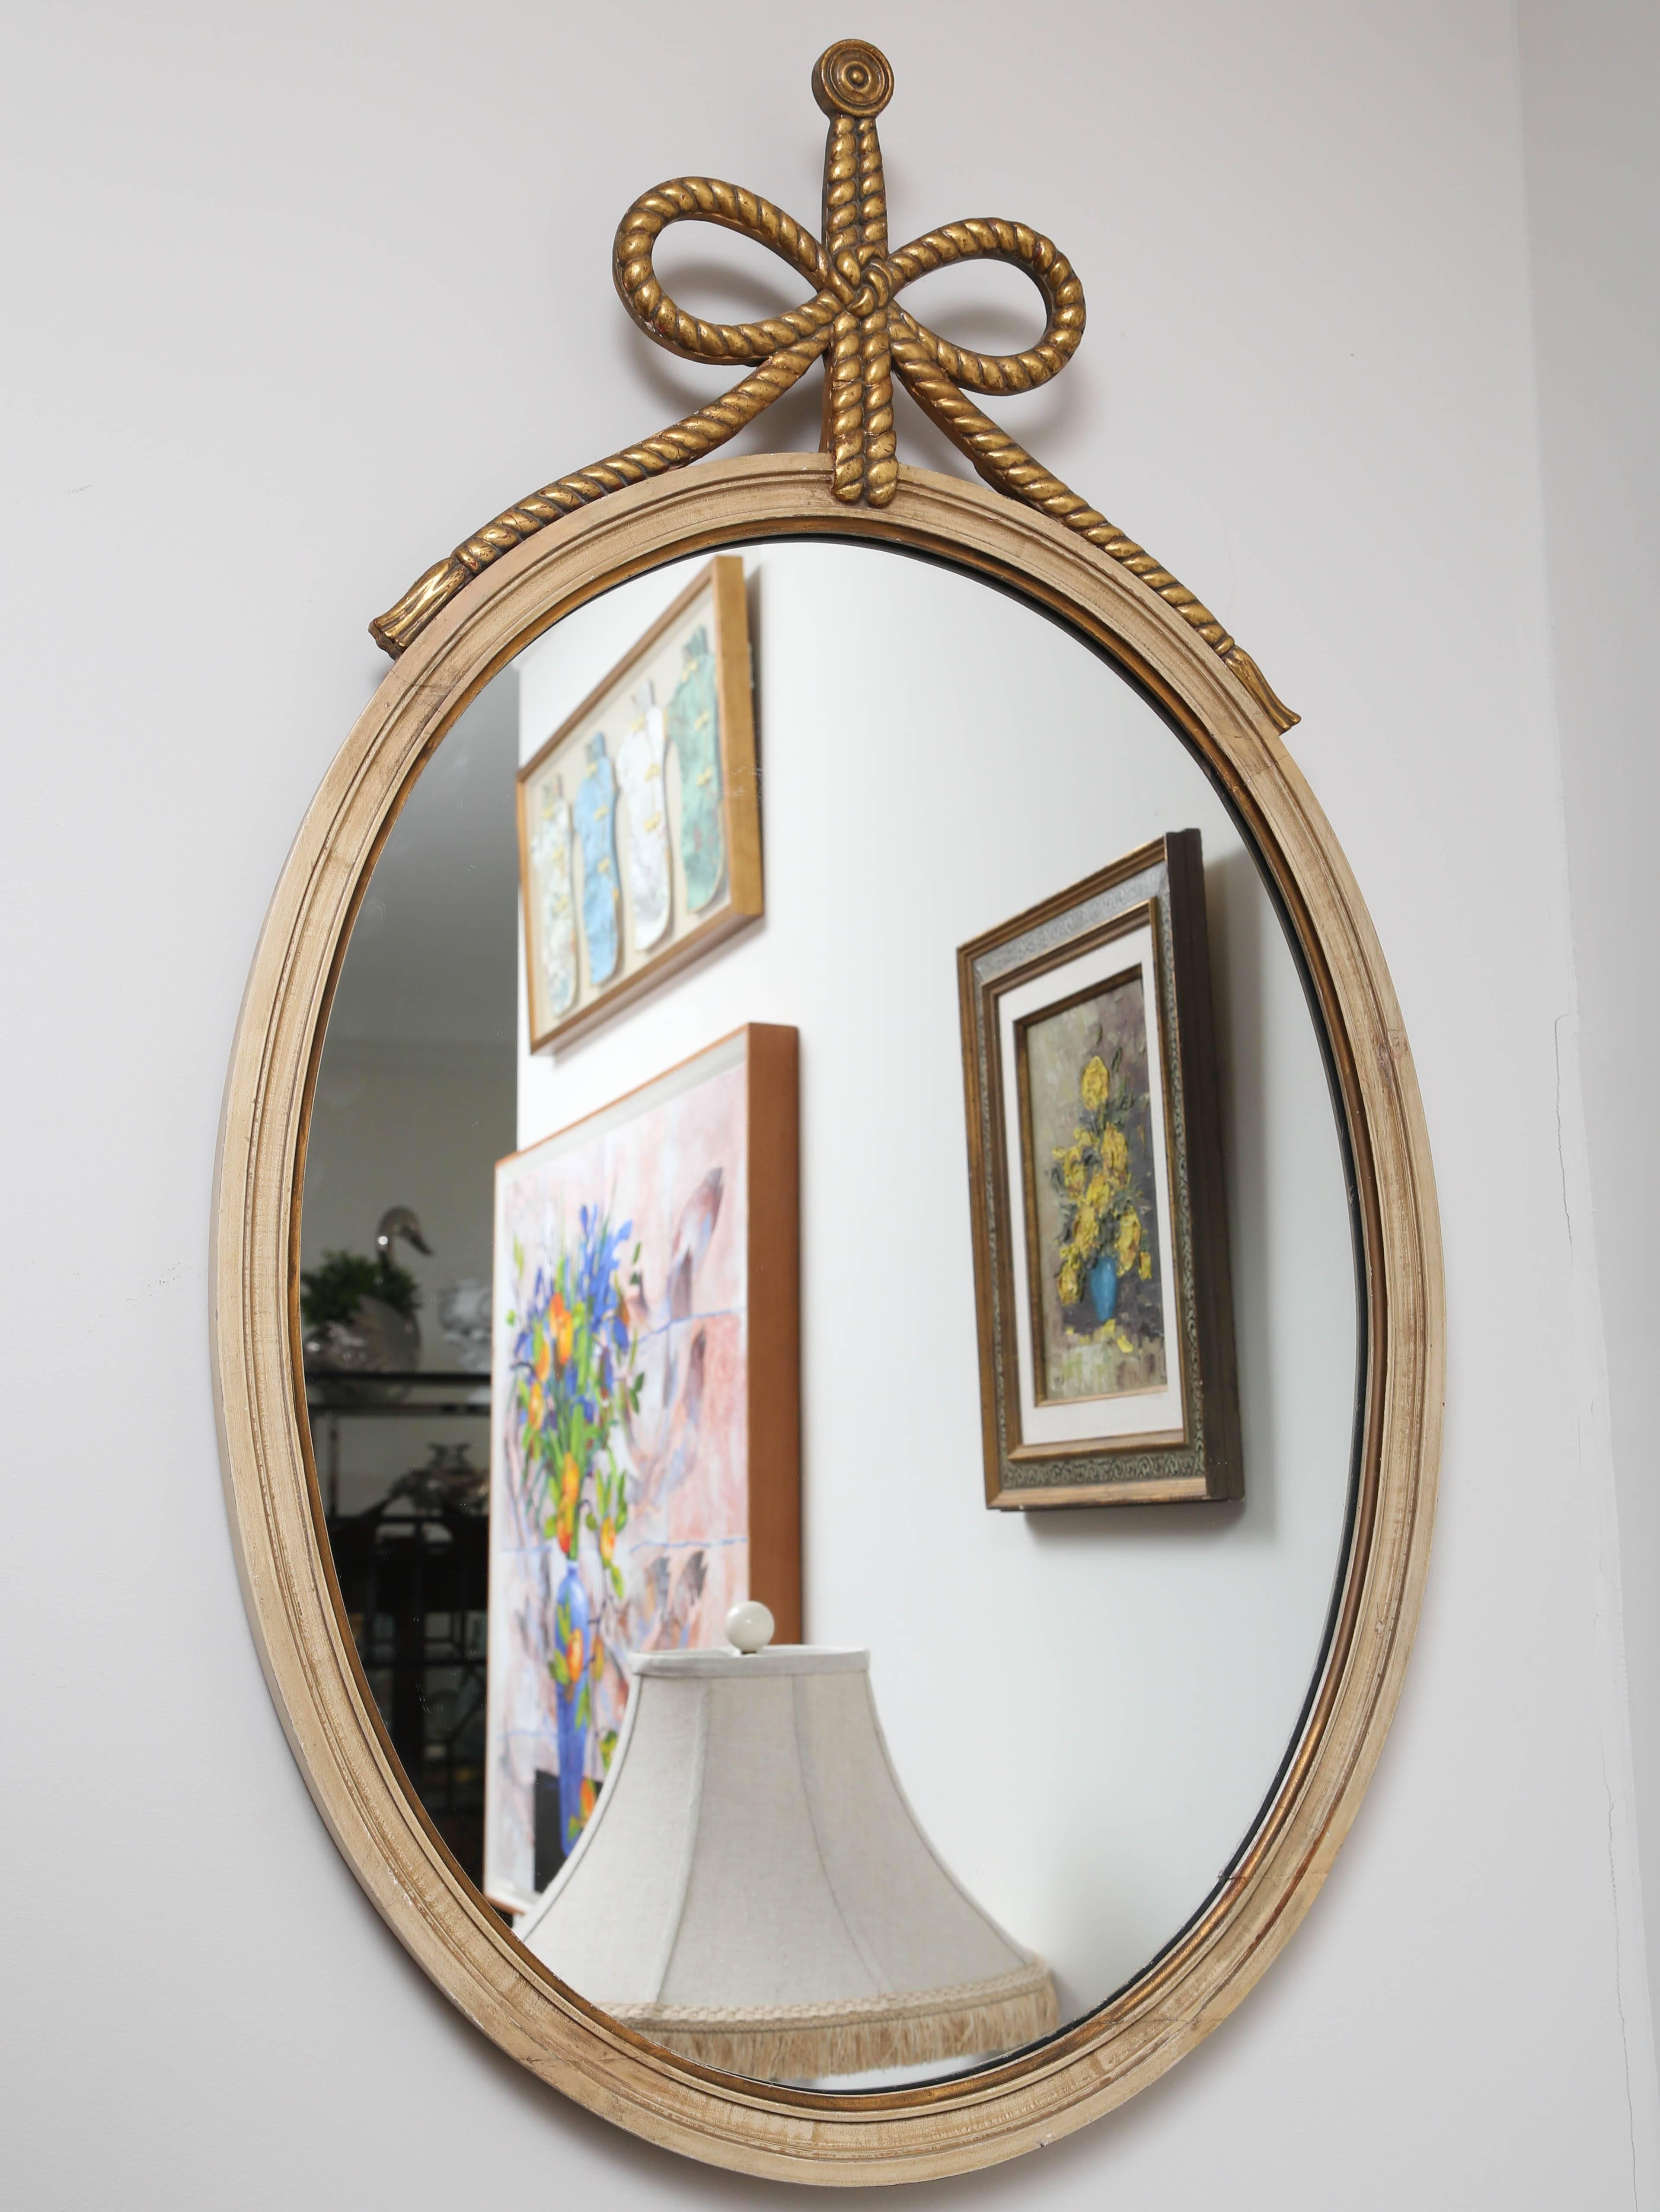 Italian cream and gold gilt oval mirror topped with a rope bow detail.